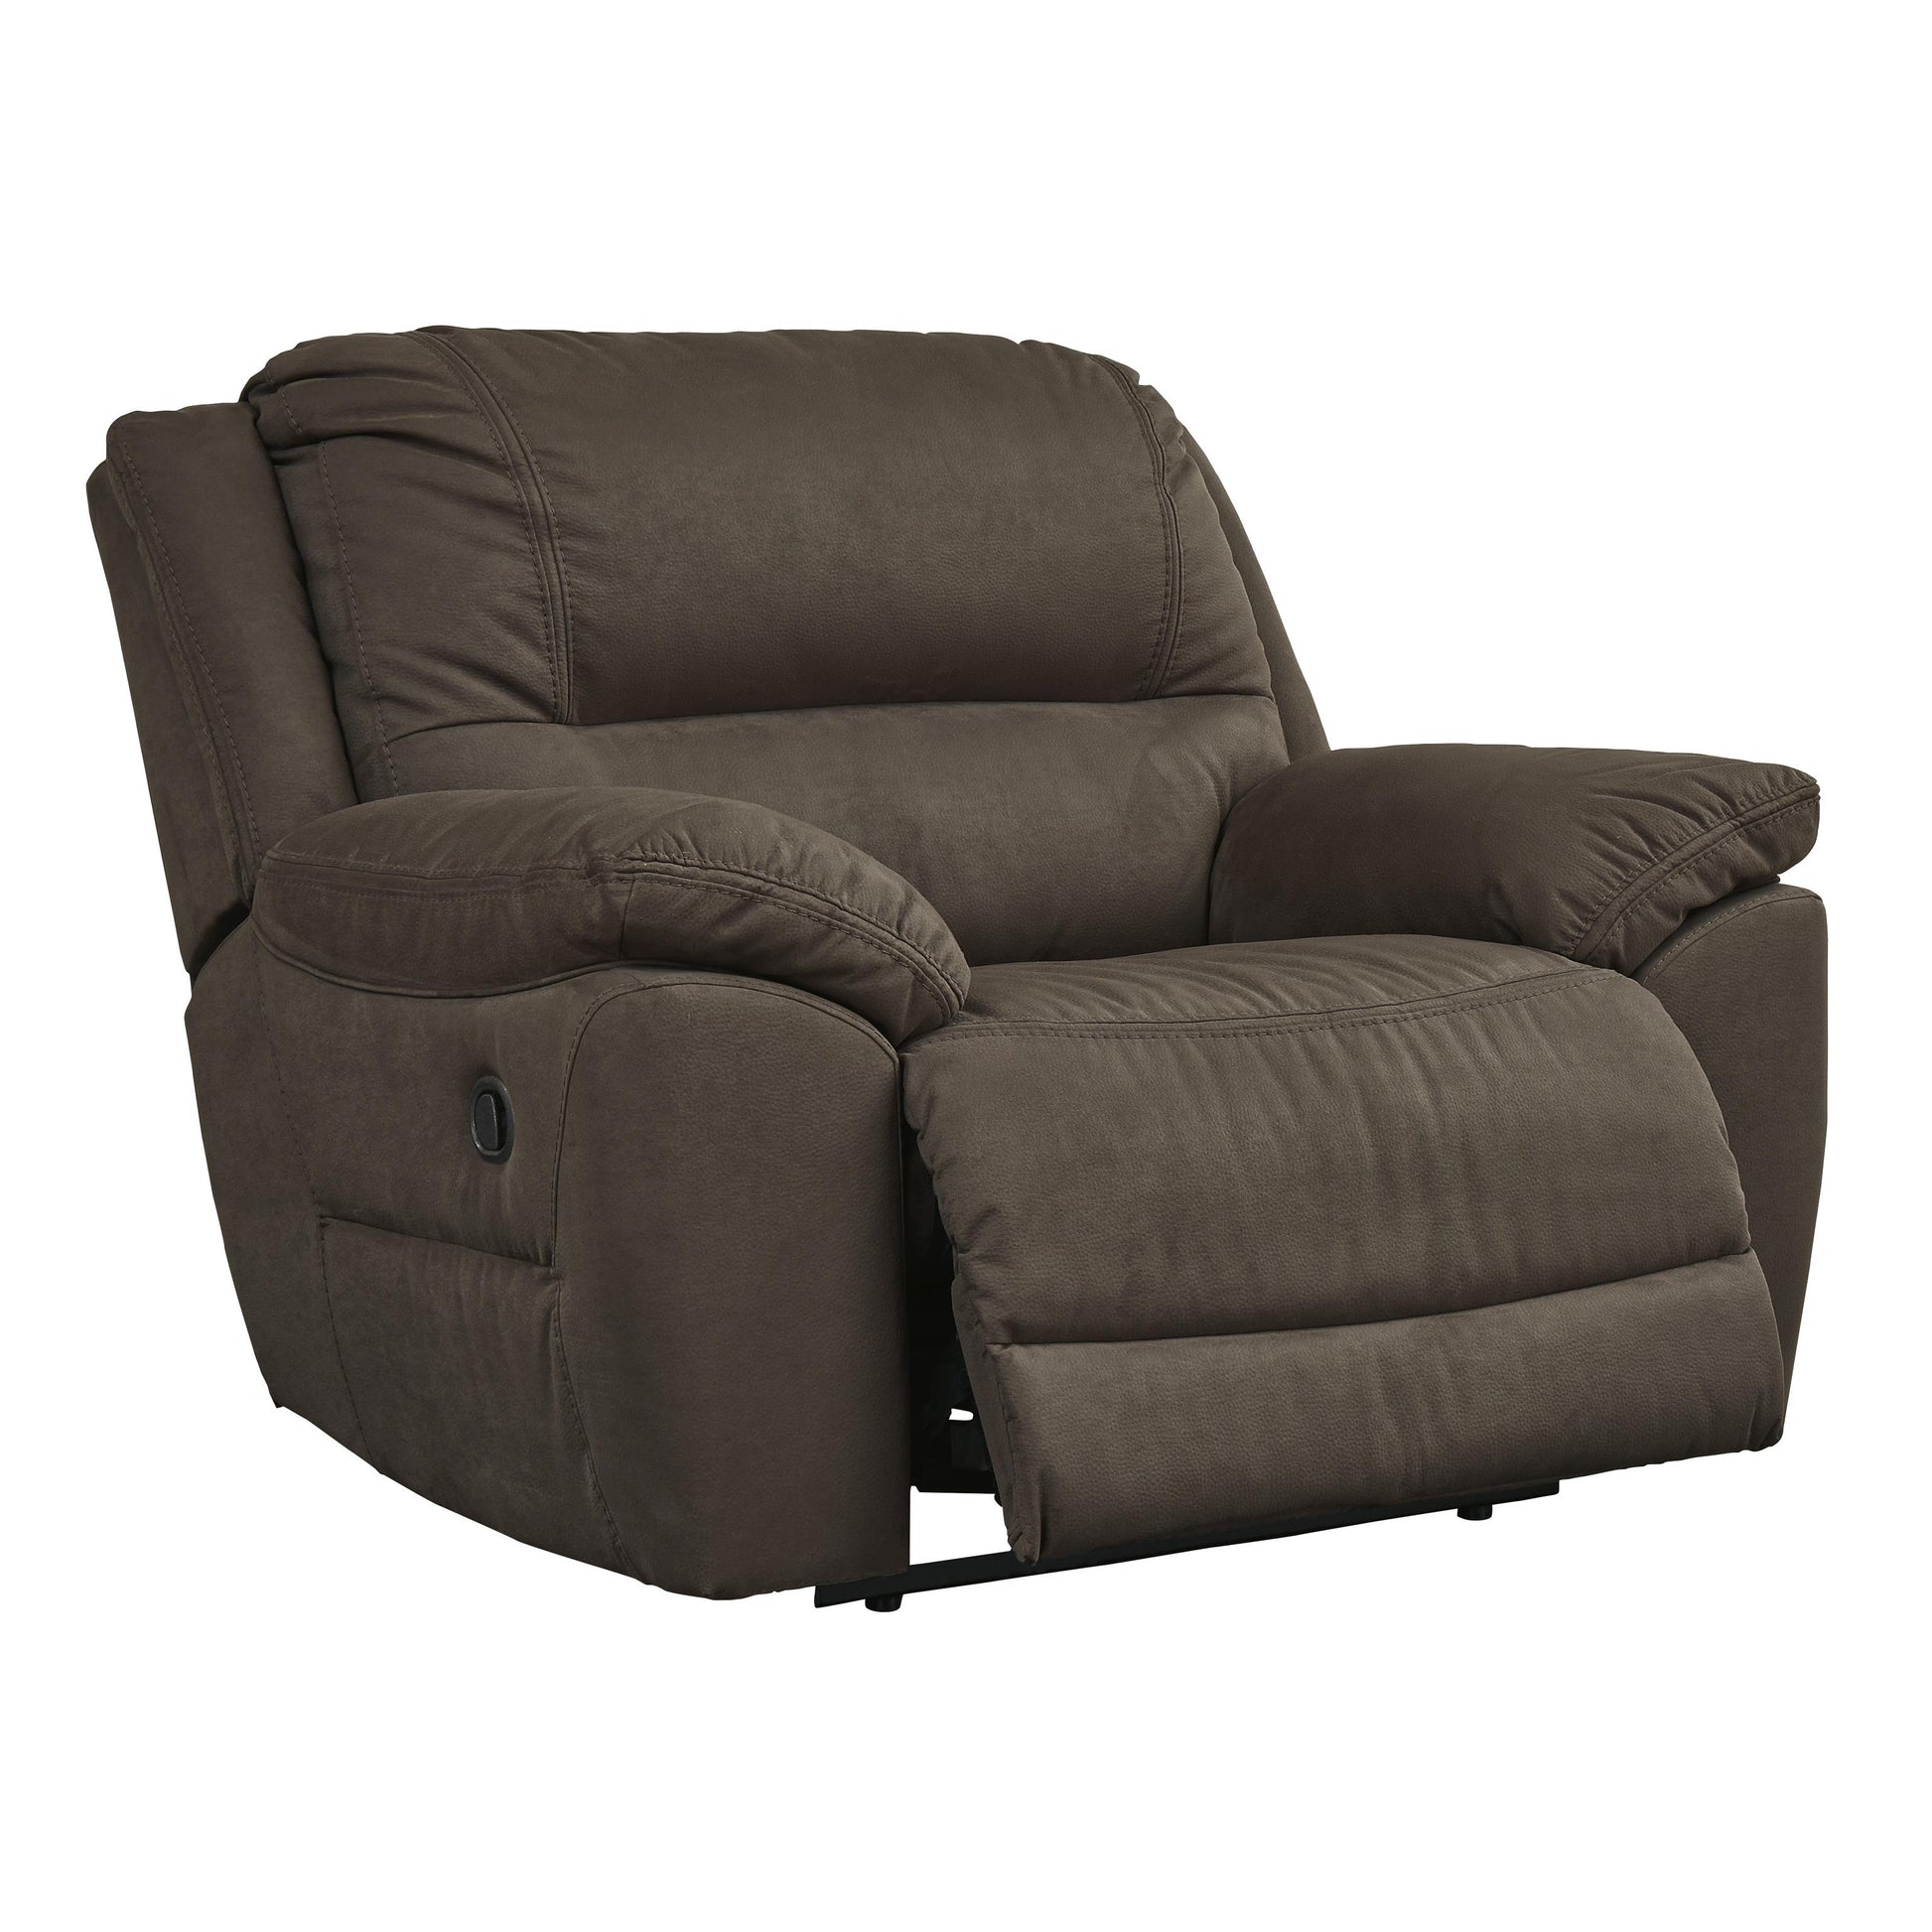 Signature Design by Ashley Next-Gen Gaucho Leather Look Recliner with Wall Recline 5420452 IMAGE 2